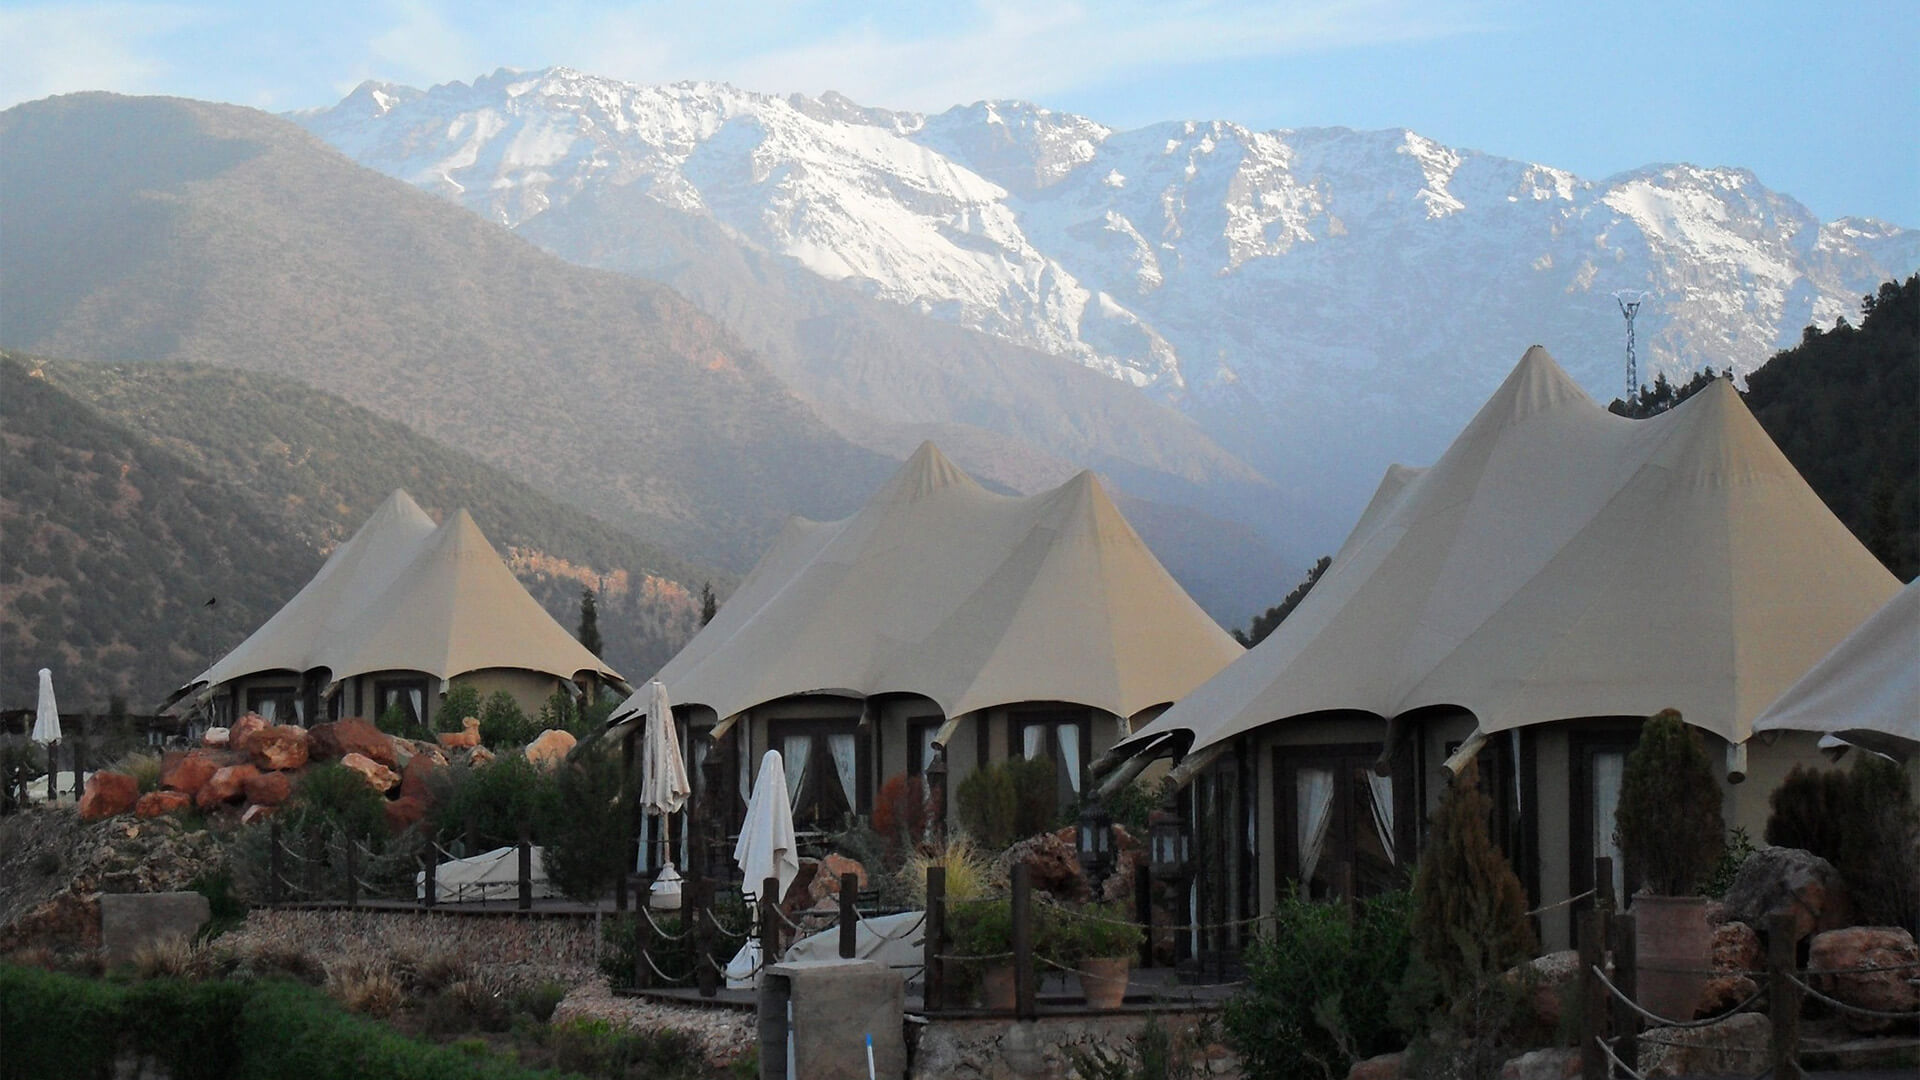 Tented accommodation in mountains